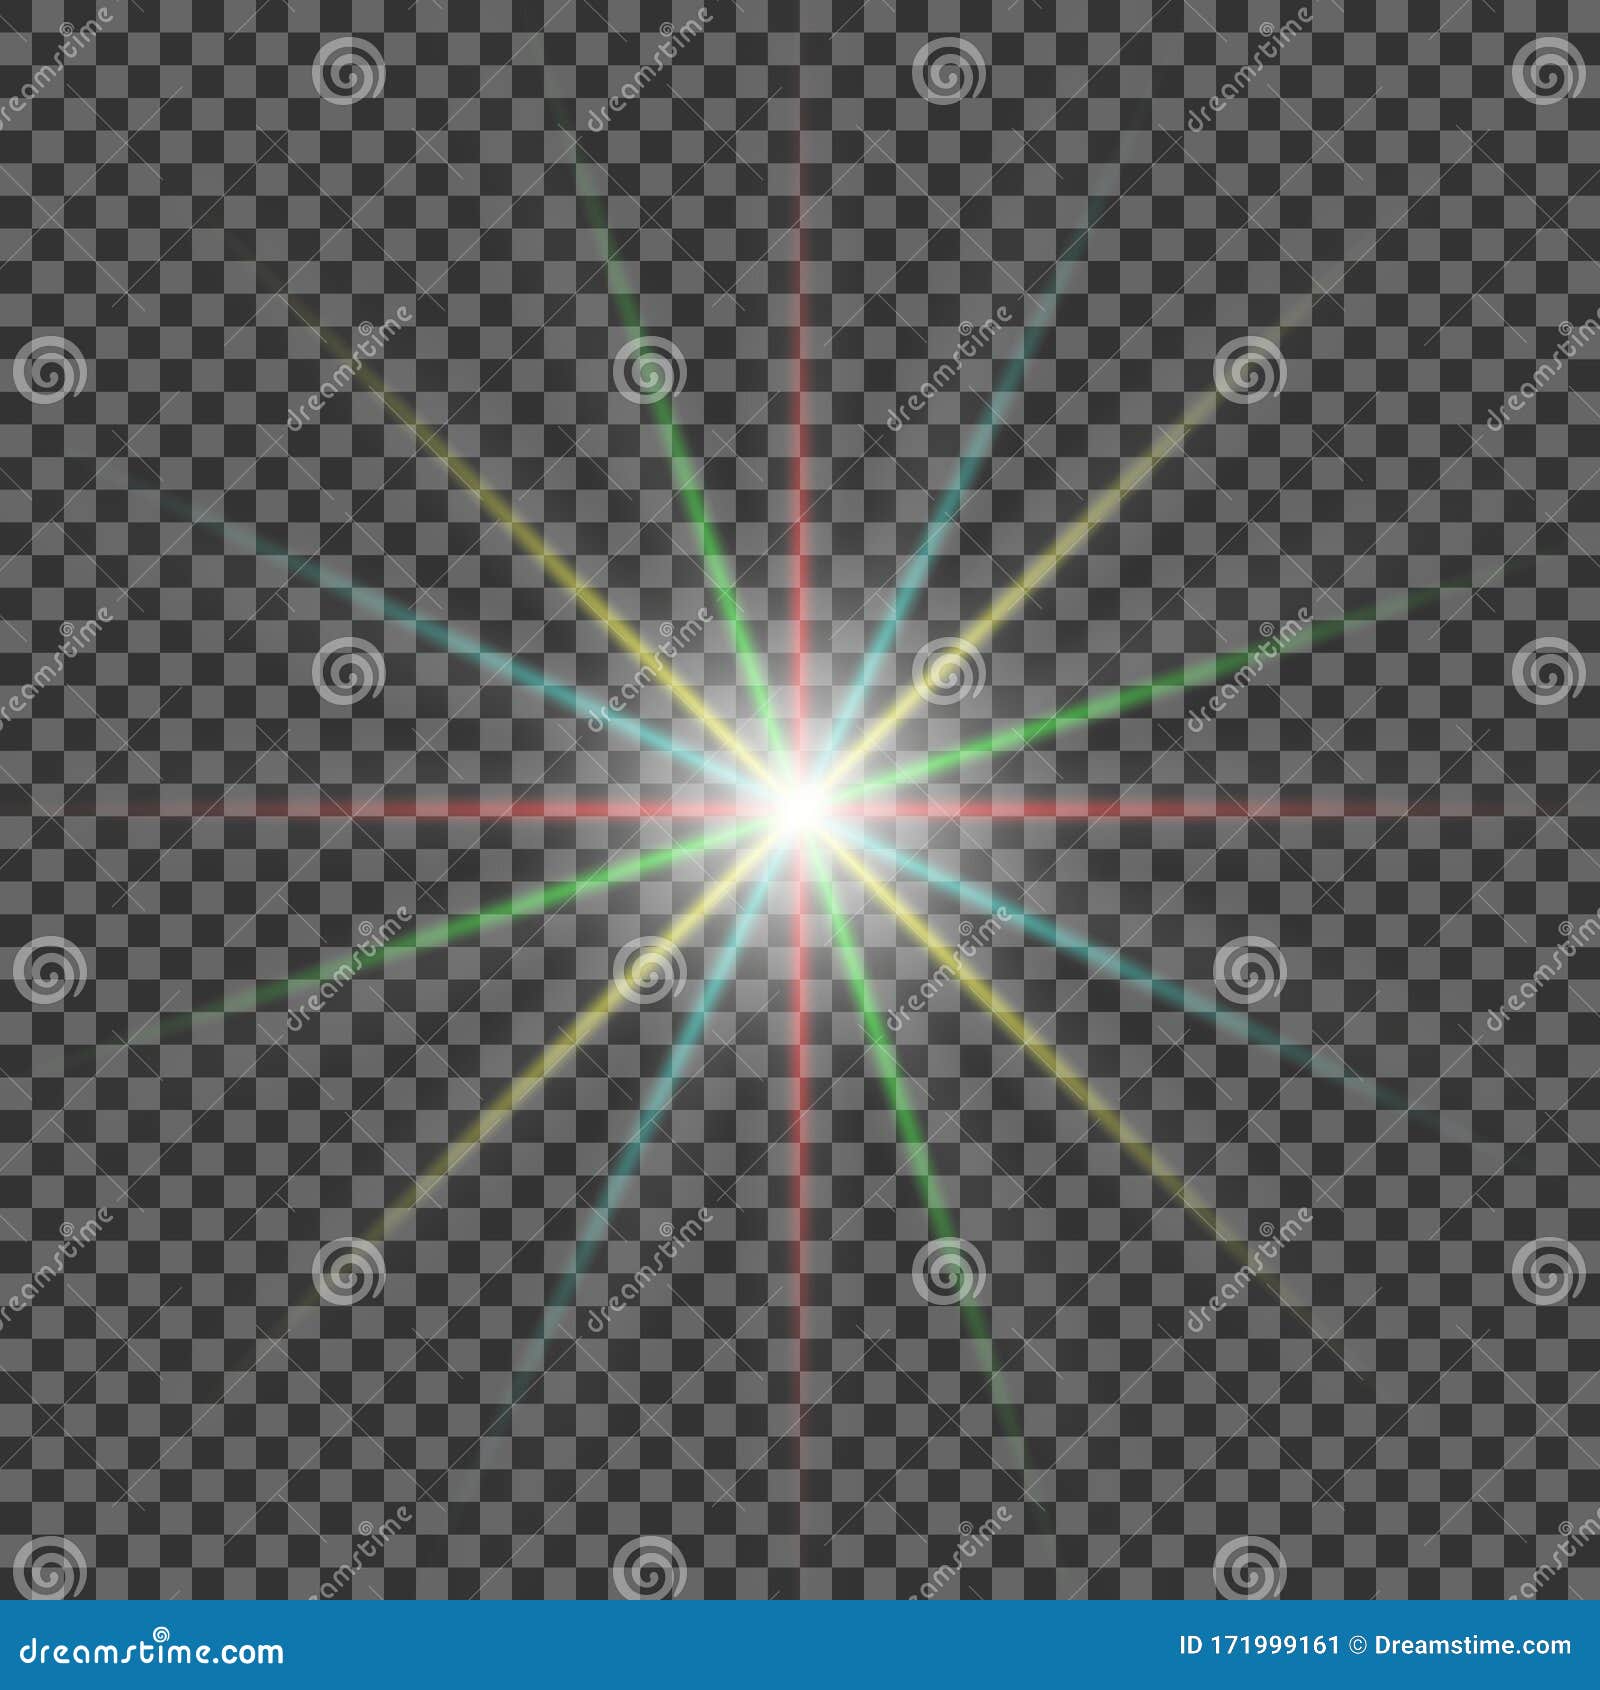 abstract image of lighting flare. set